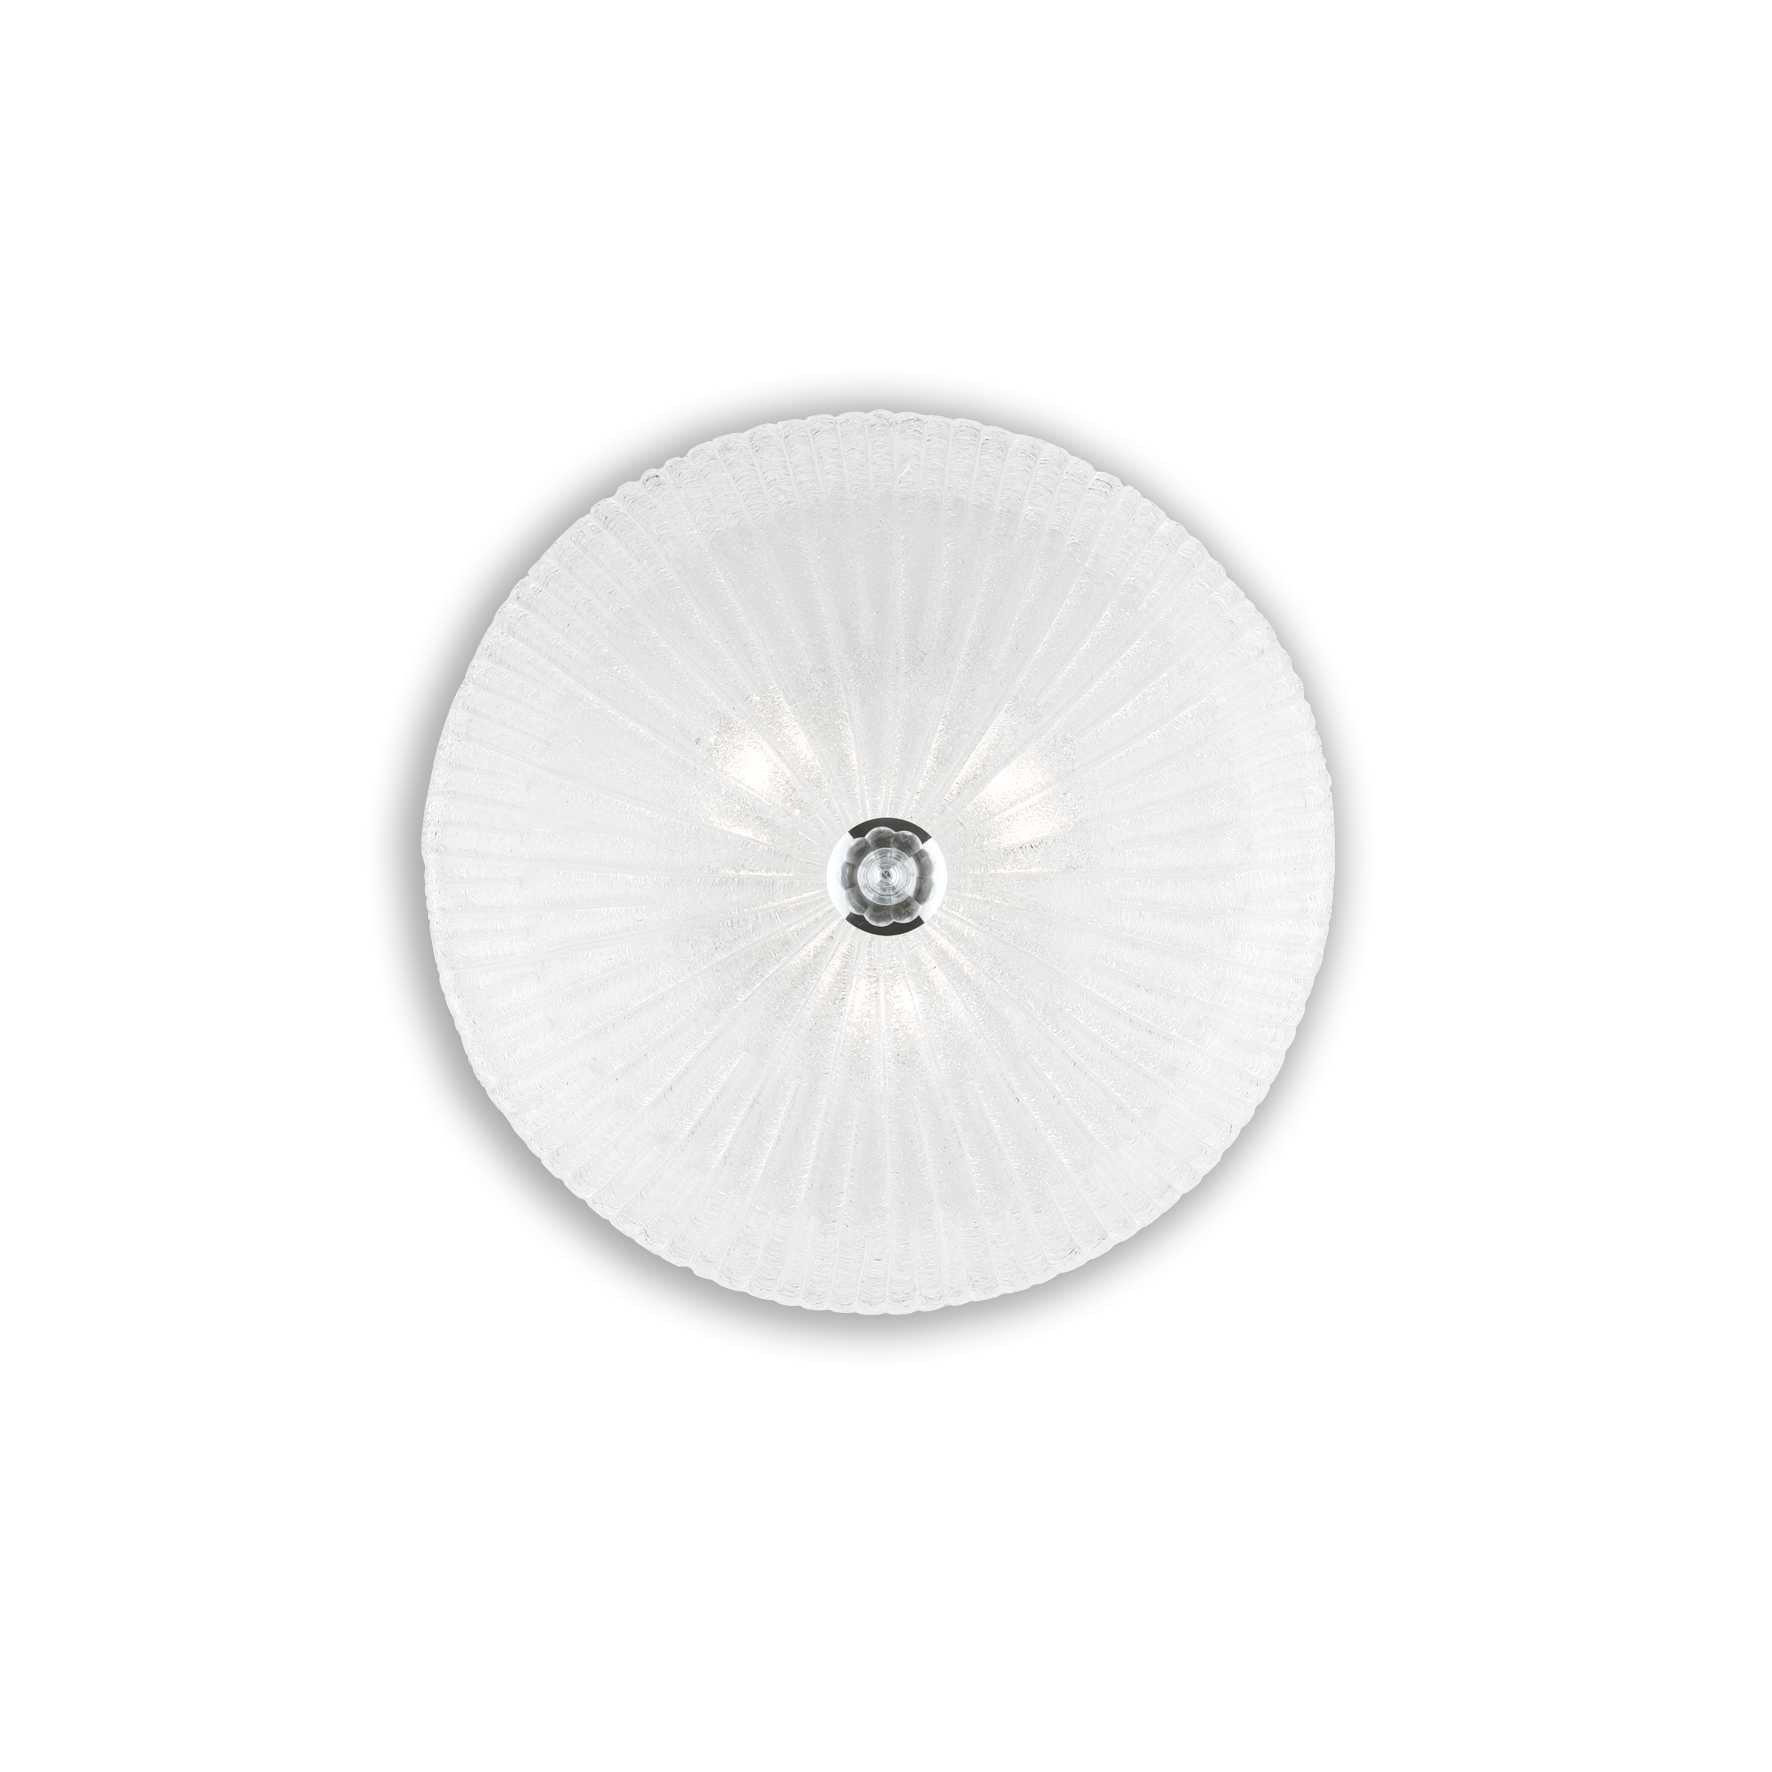 Shell 3 Light Indoor Flush Wall Ceiling Light Chrome with Clear Glass E27 - image 1